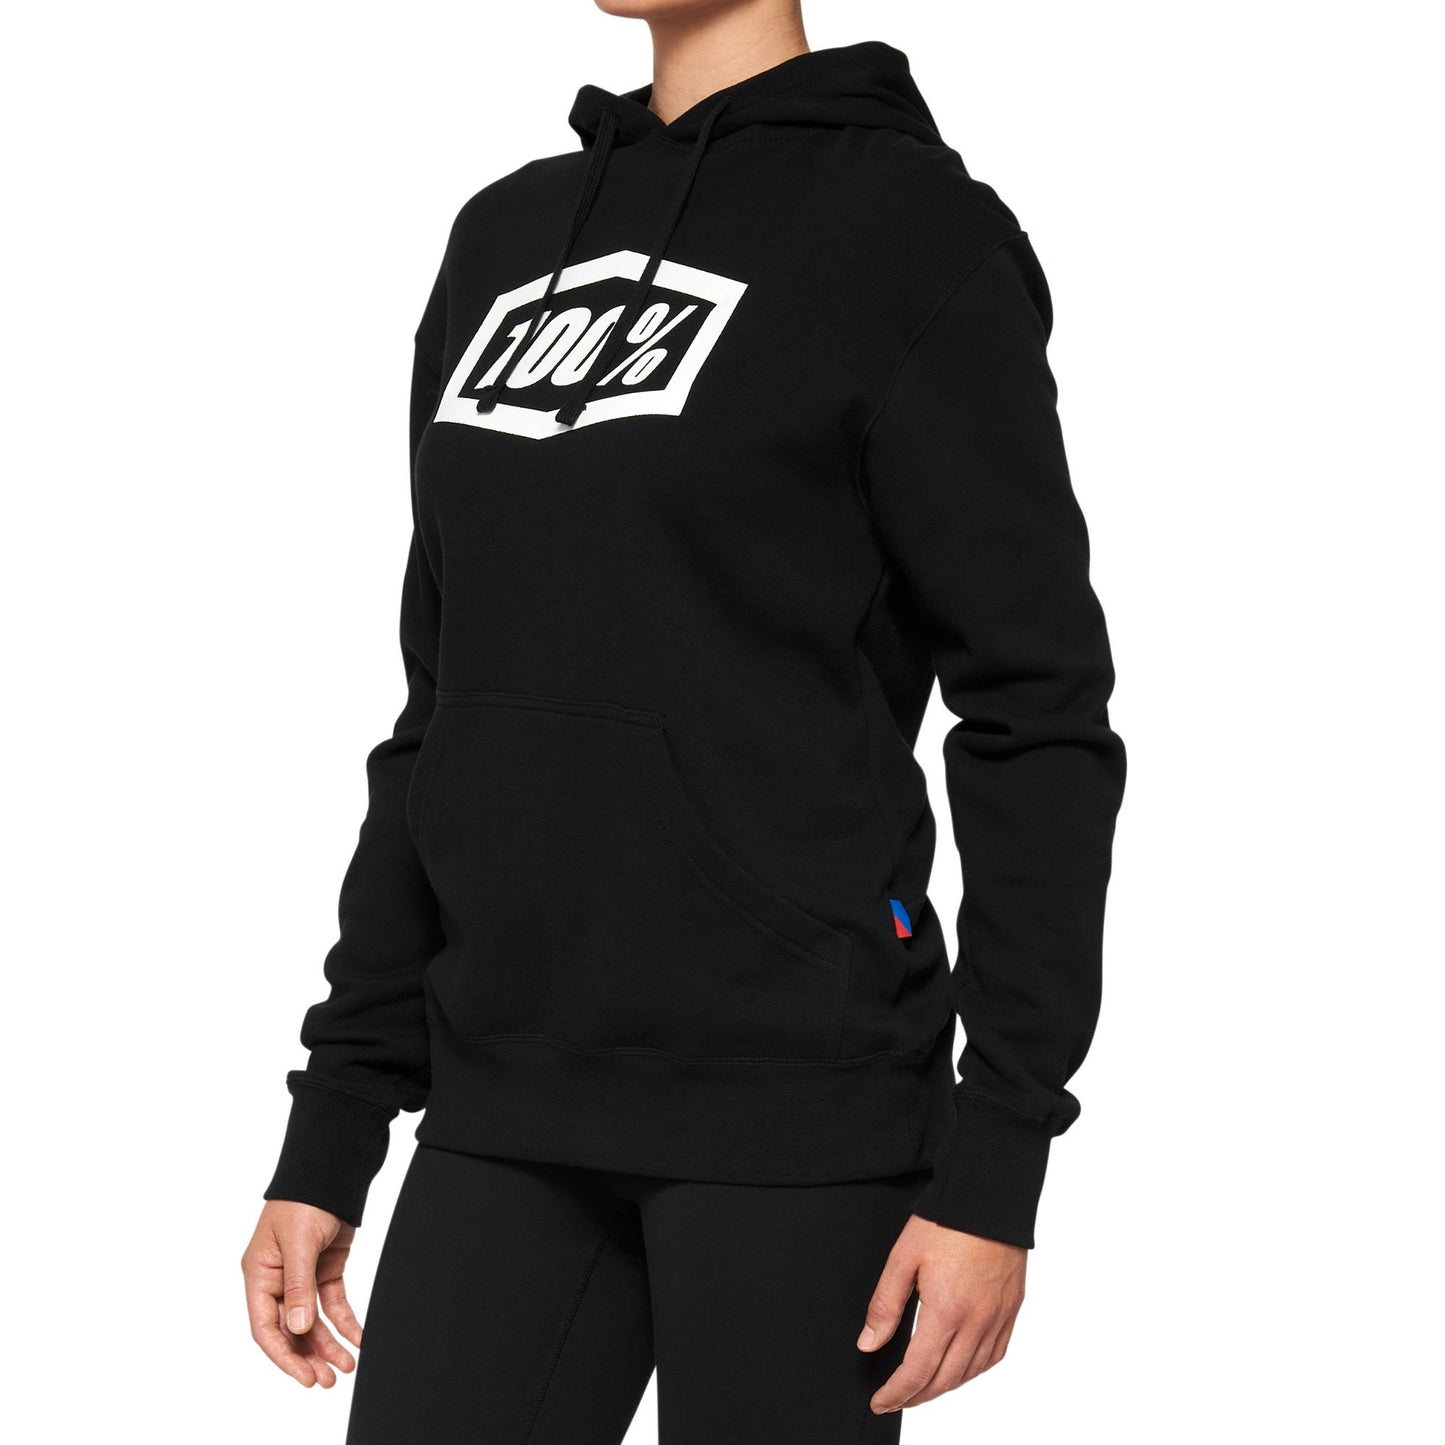 100% ICON Women's Pullover Hoodie